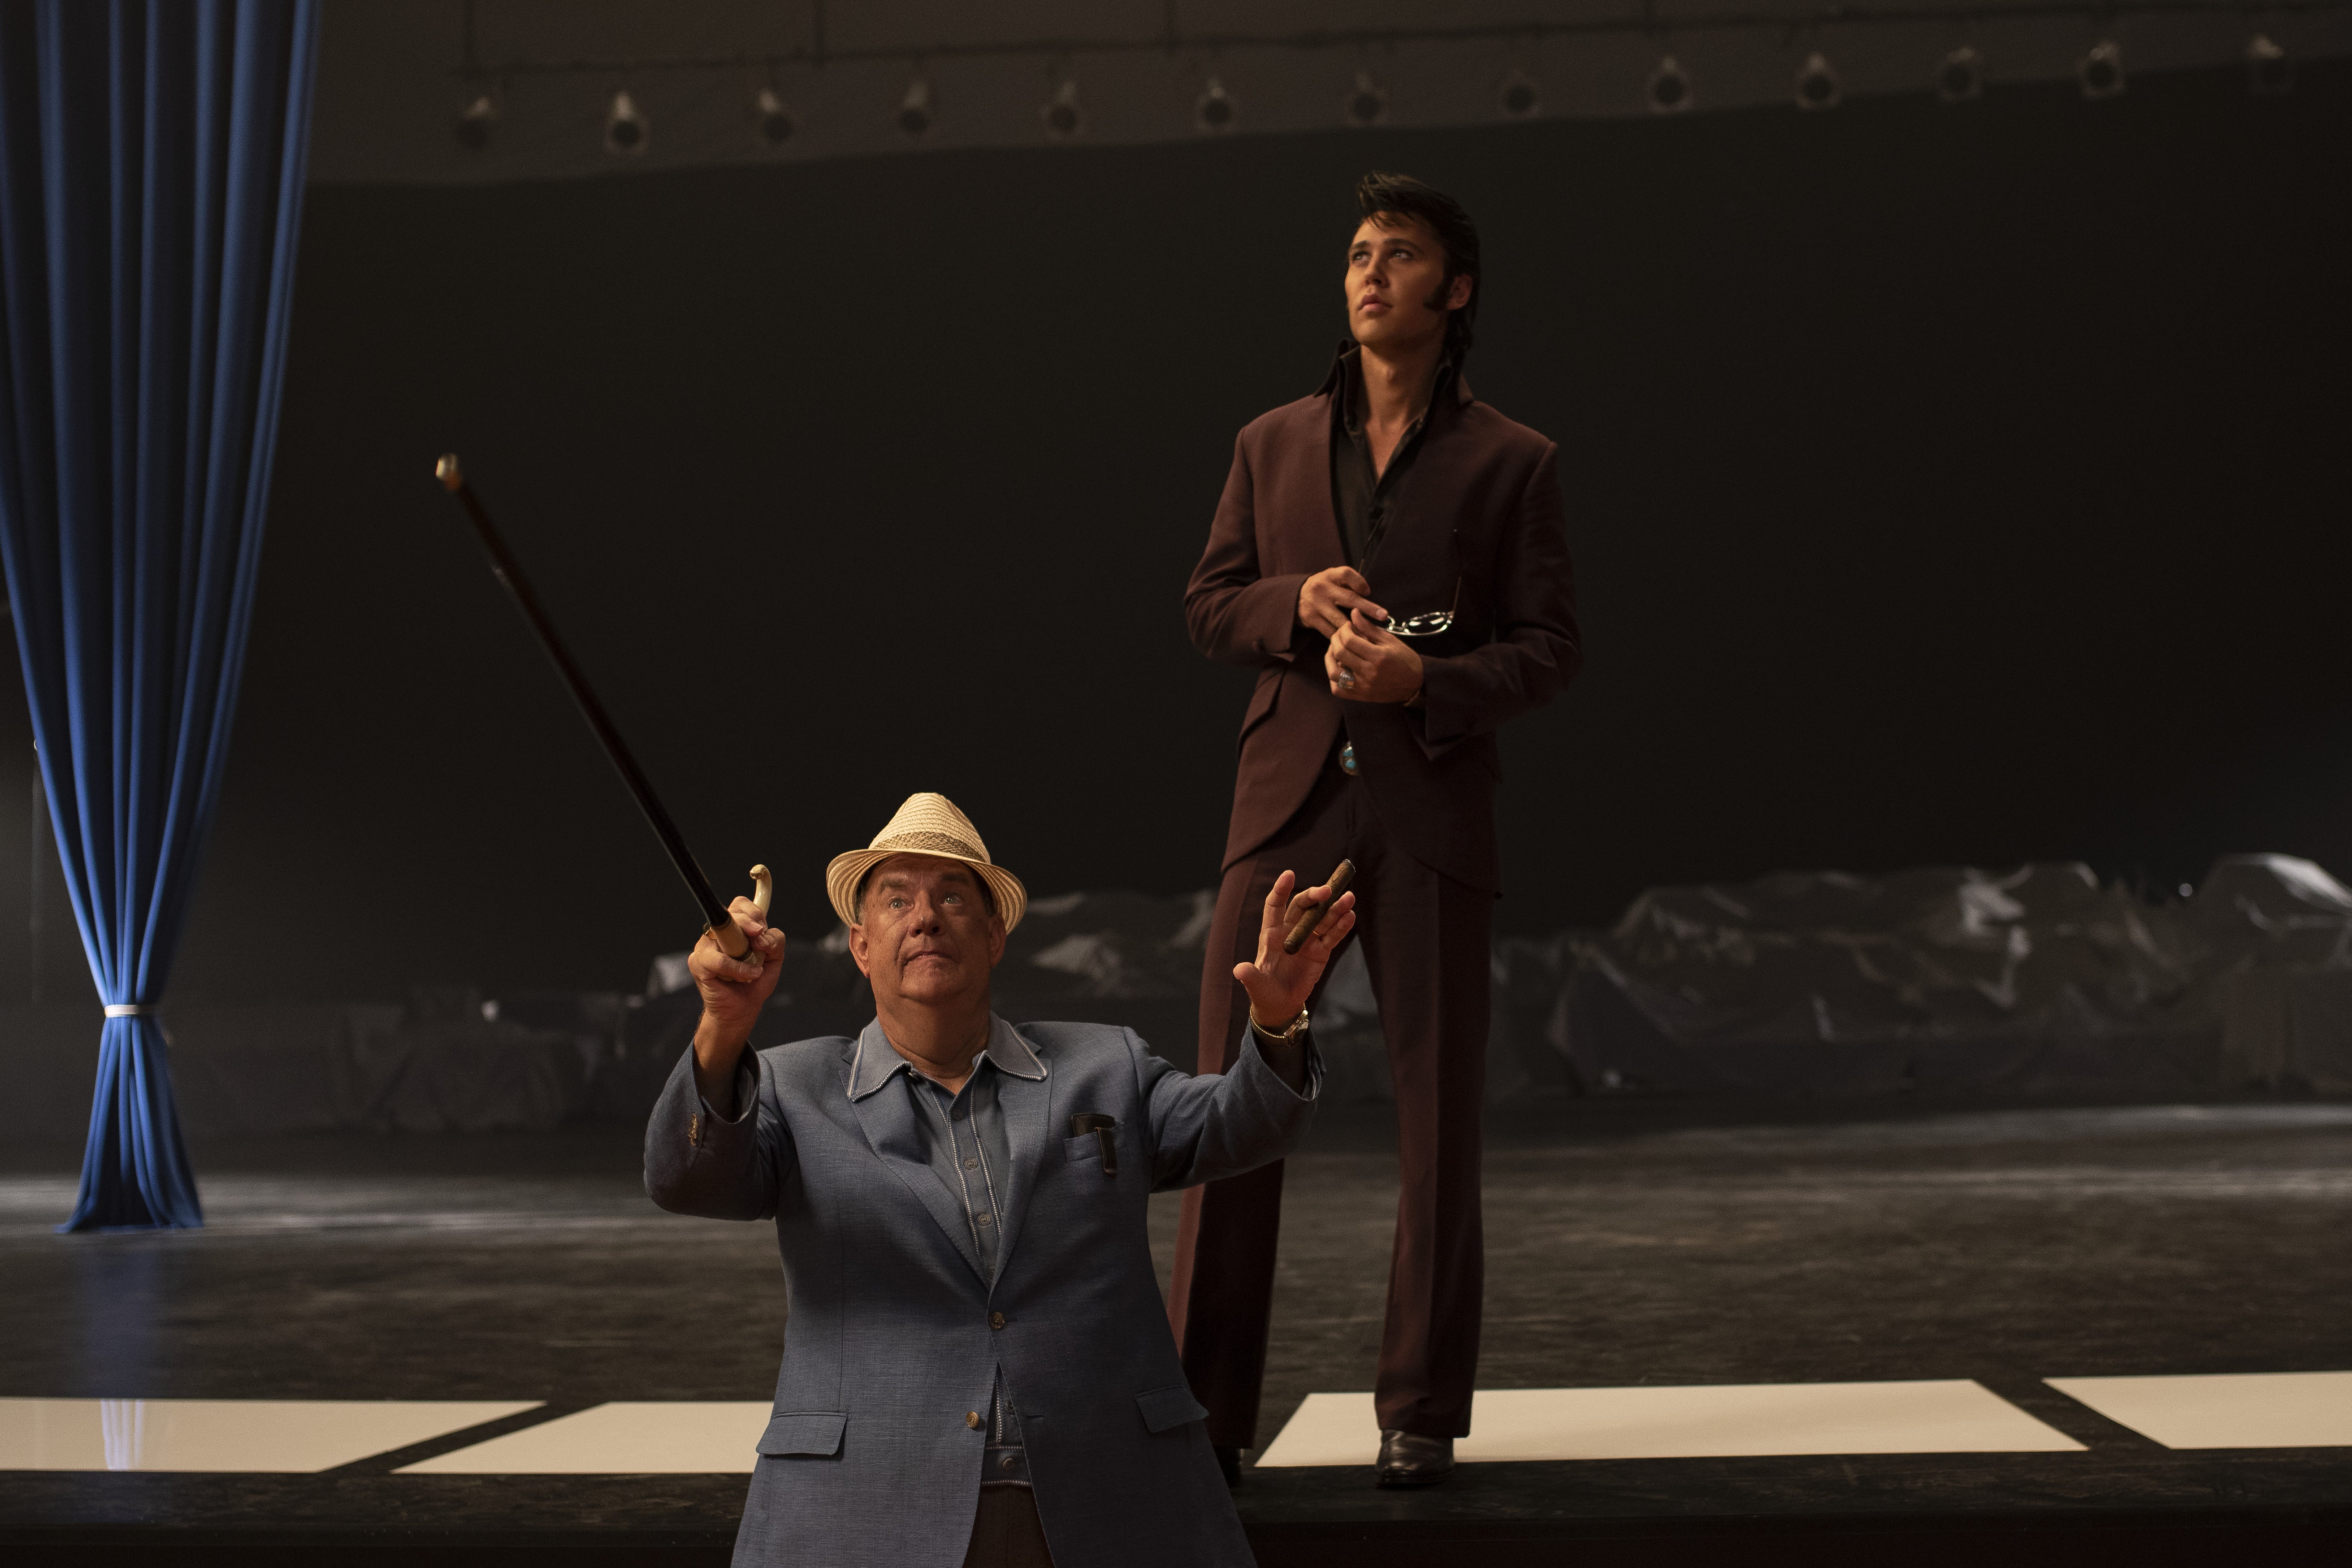 Hanks, in a fat suit under a regular, powder-blue suit, holds up his hands in front of a stage, as if presenting a grand vision, with a hat on his head and a cane in one hand. Behind him, a handsome Austin Butler, tanned and standing on the empty page in a burgundy suit, appears to consider the vision while holding his signature sunglasses in one hand.